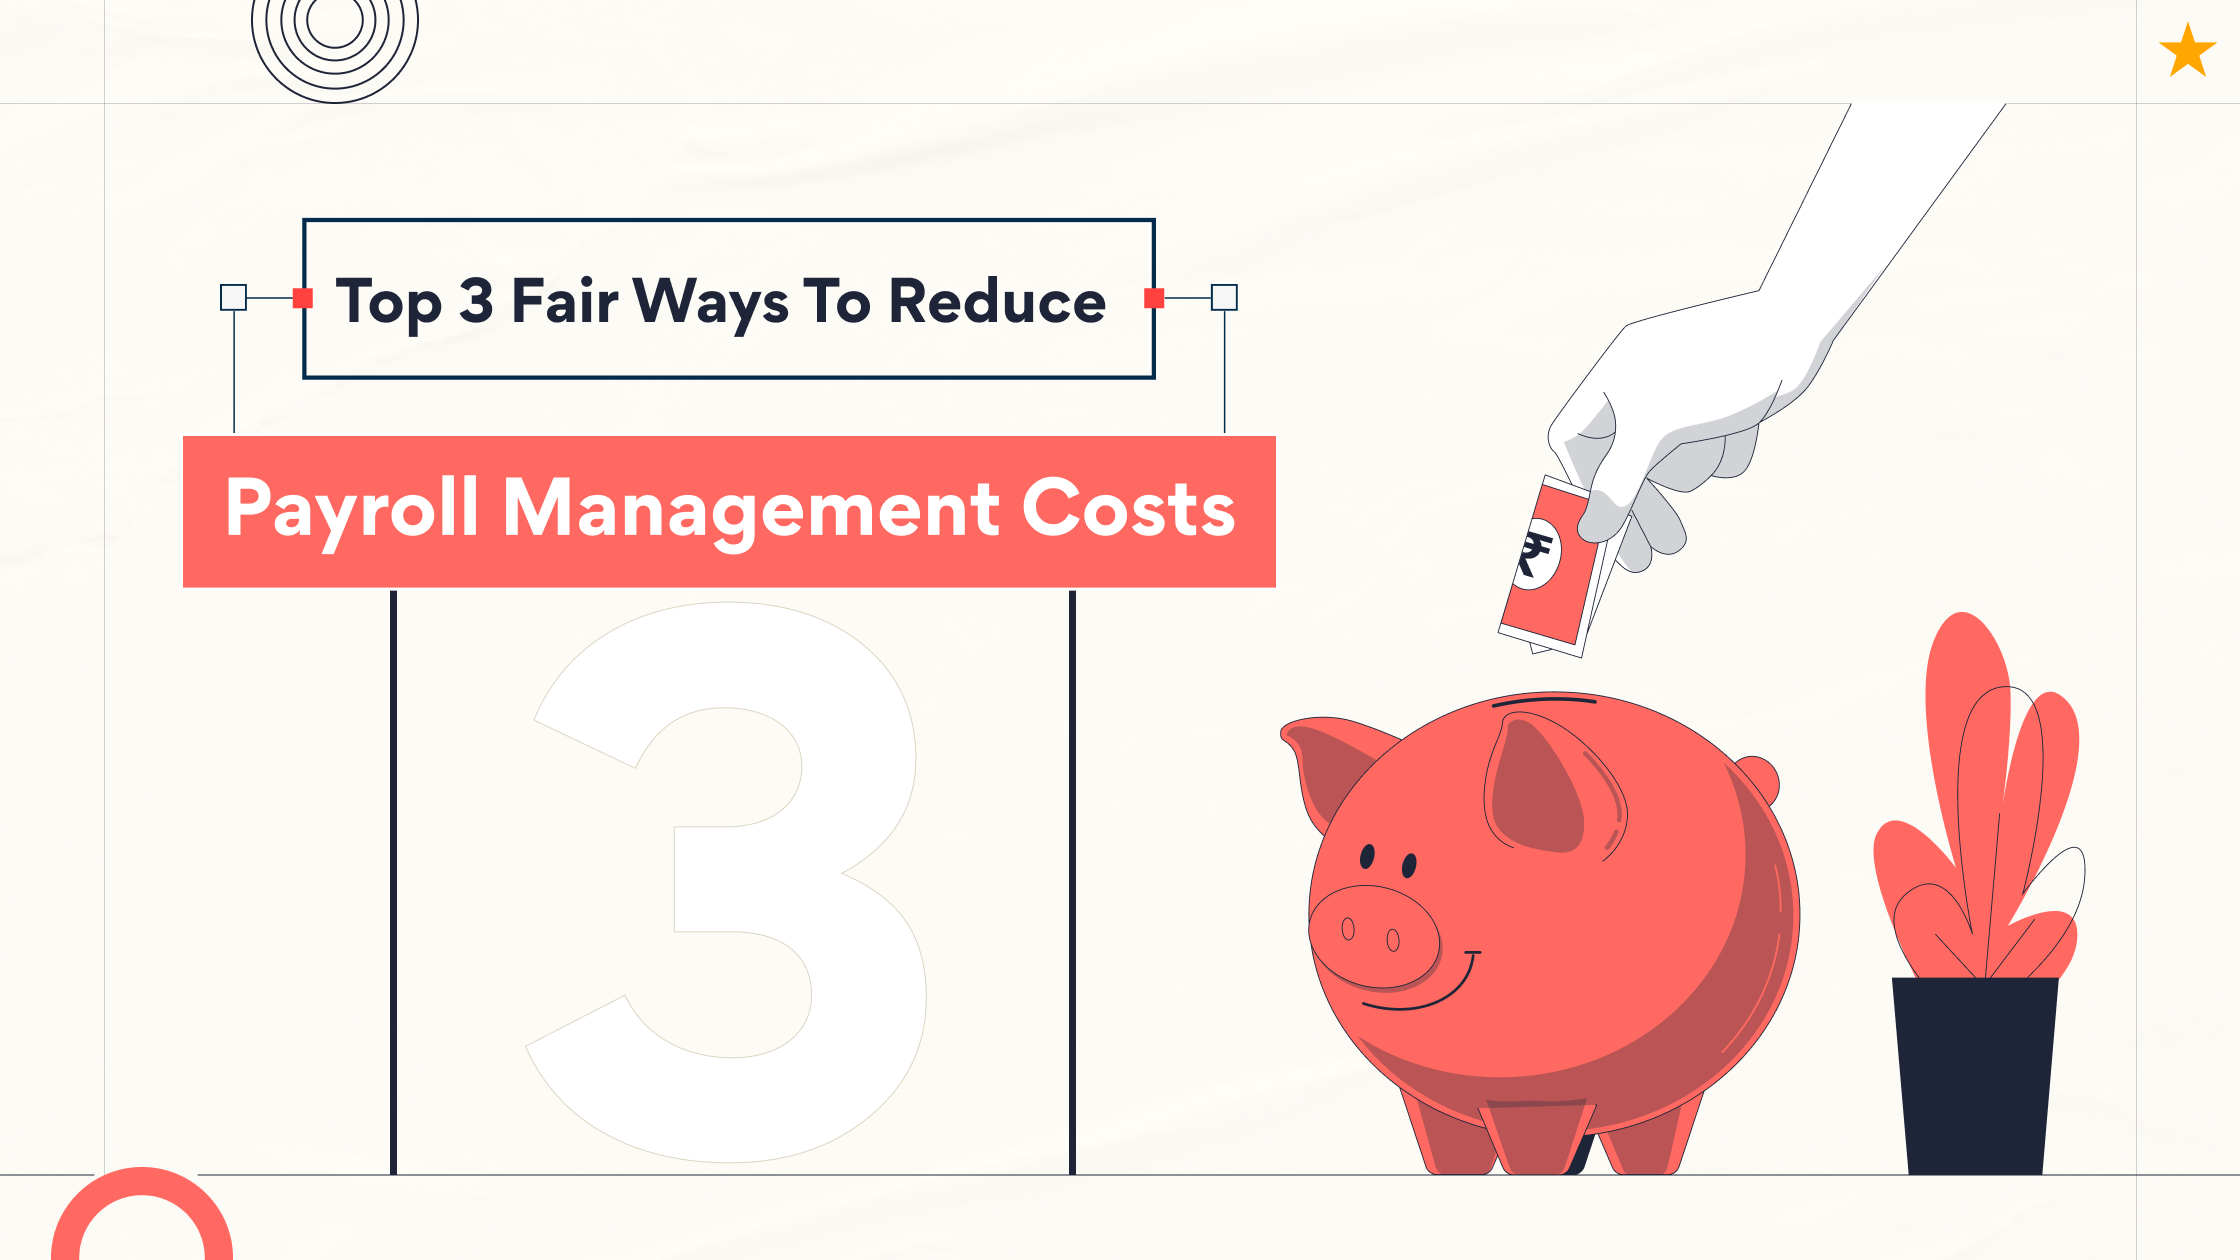 Top 3 Fair Ways To Reduce Payroll Management Costs